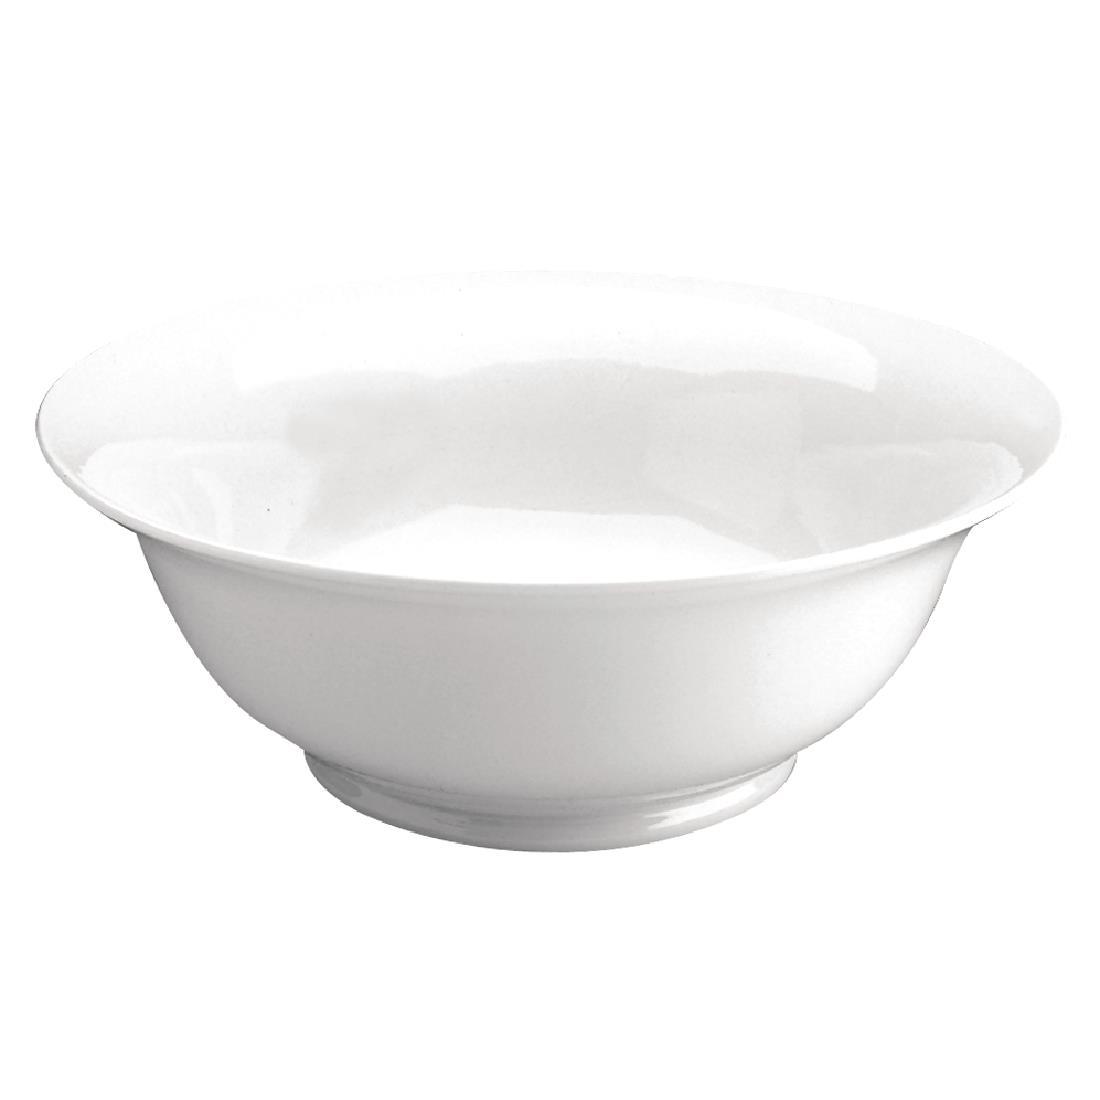 Olympia Whiteware Salad Bowls 235mm (Pack of 6) - W436  - 4